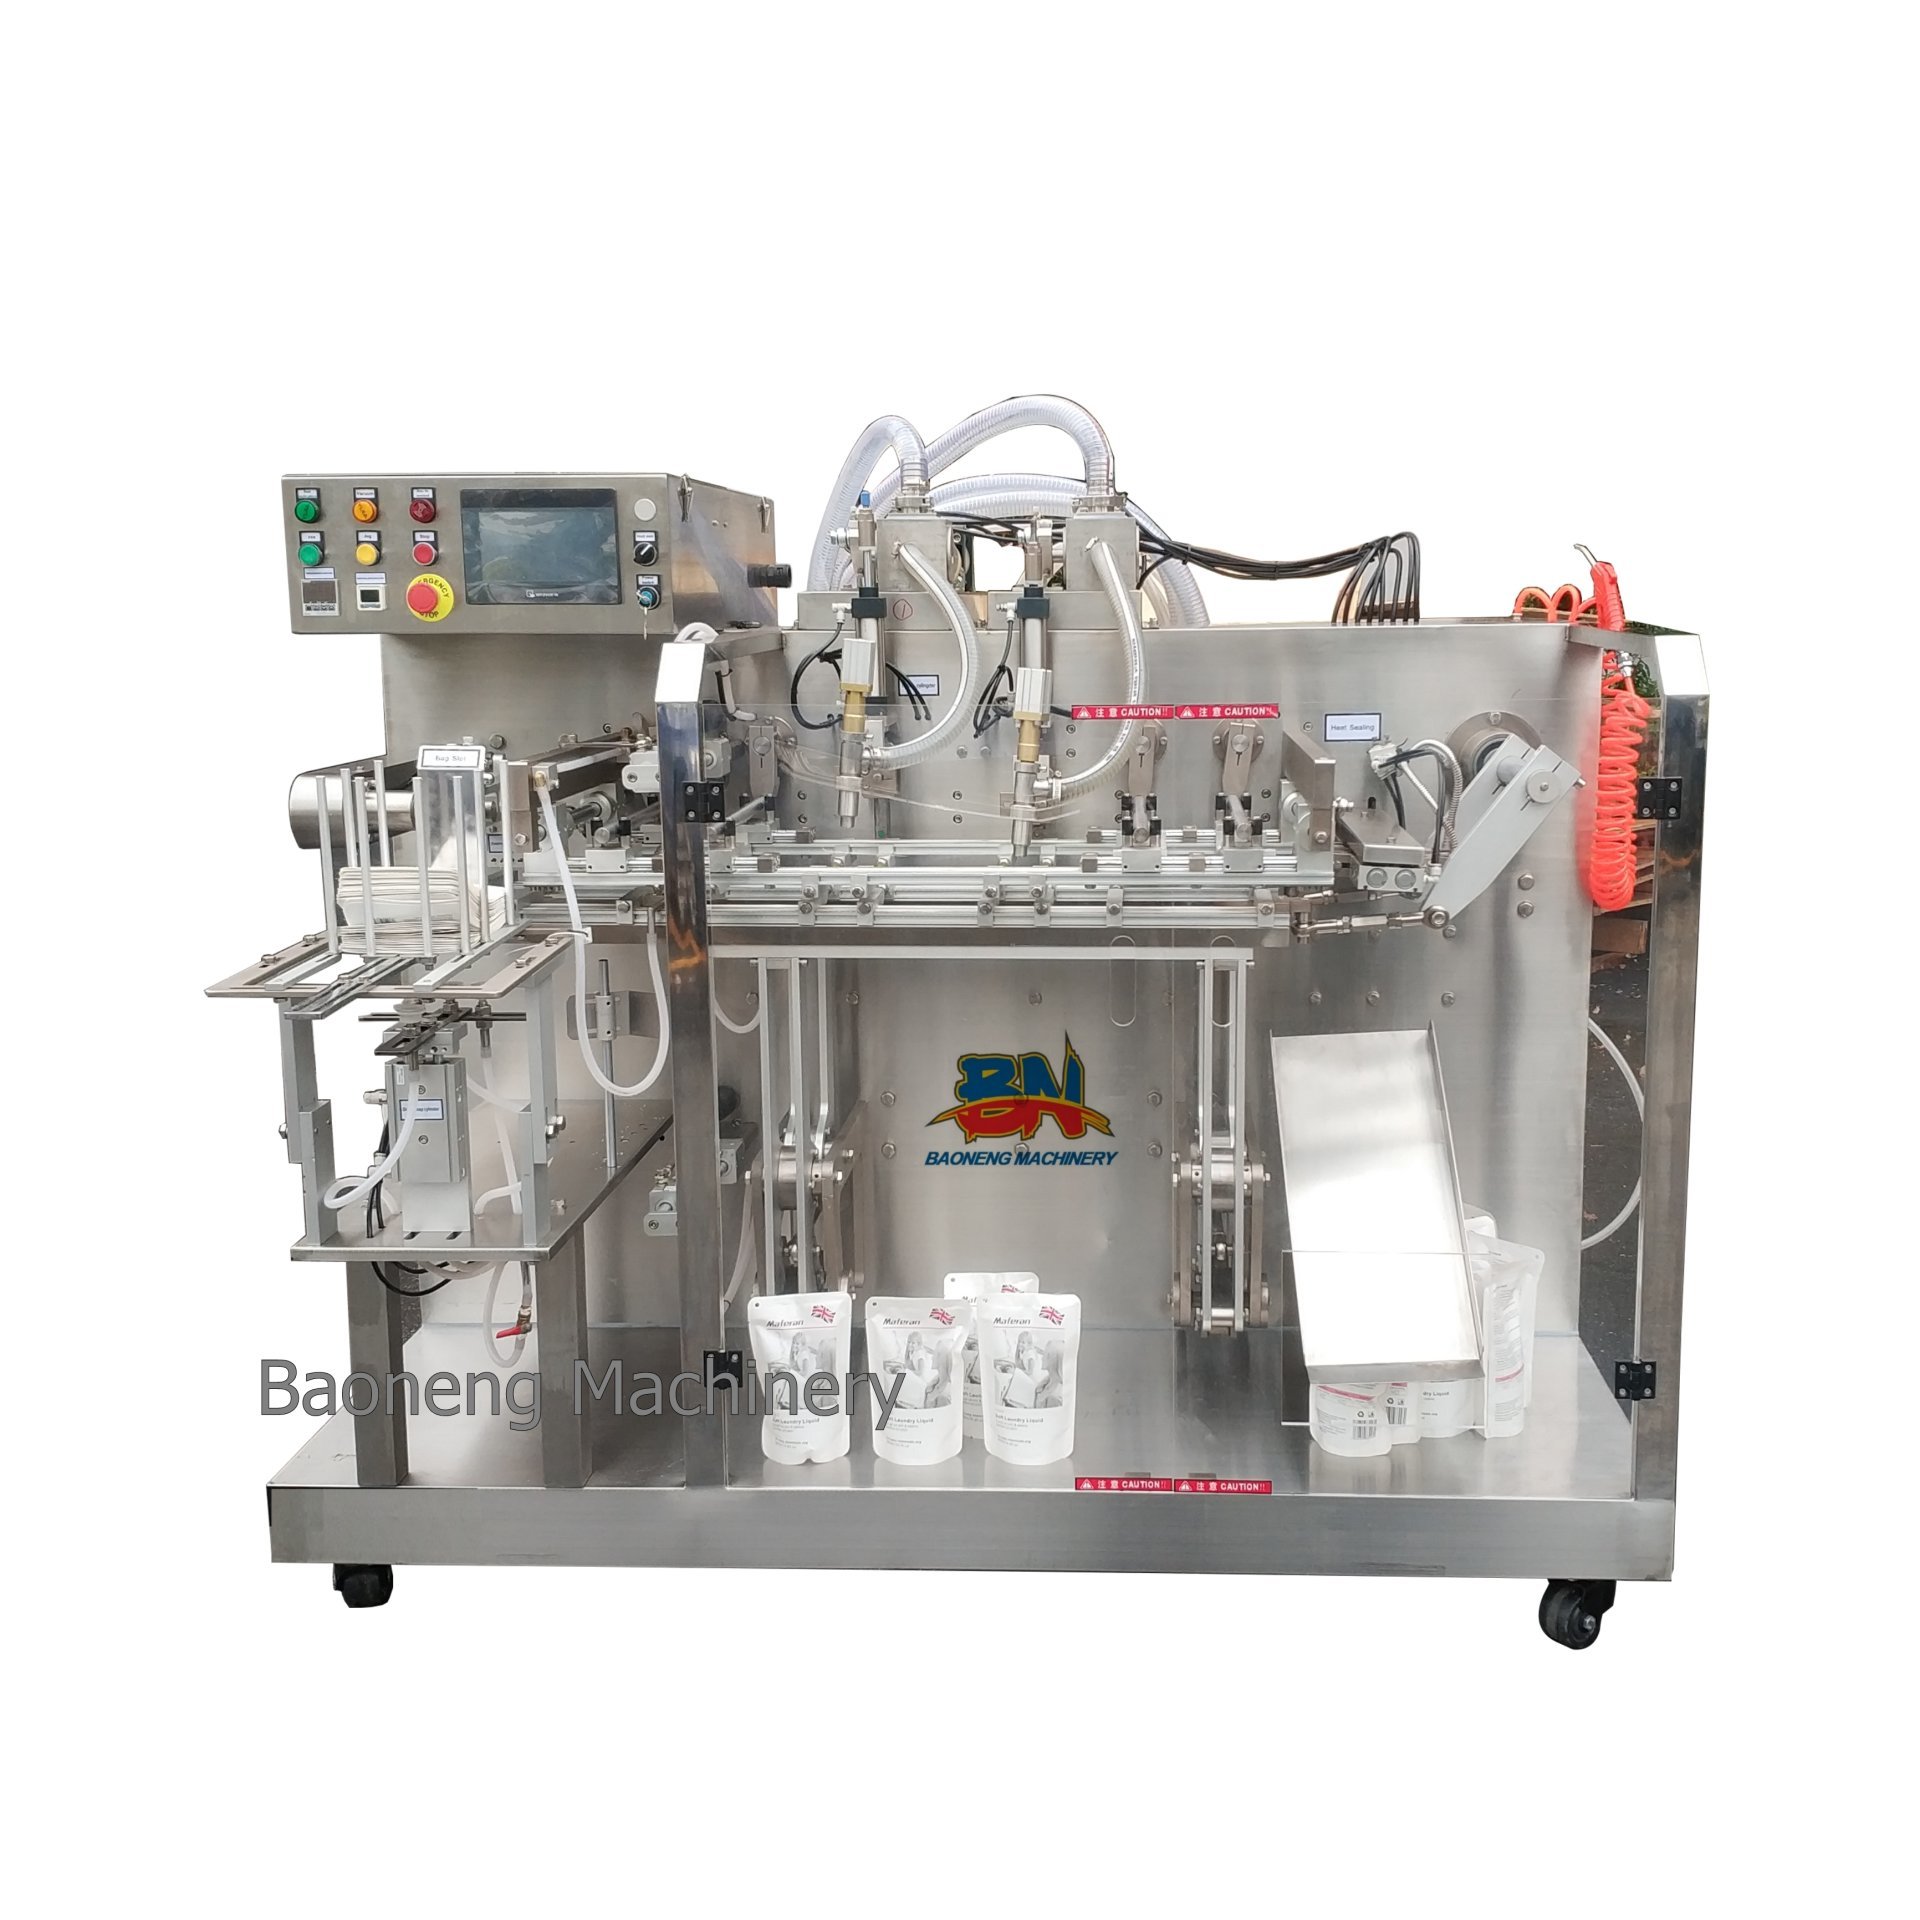 Automatic Bag Pouch Liquid Packing Machine for premade bags Filling Sealing Packaging